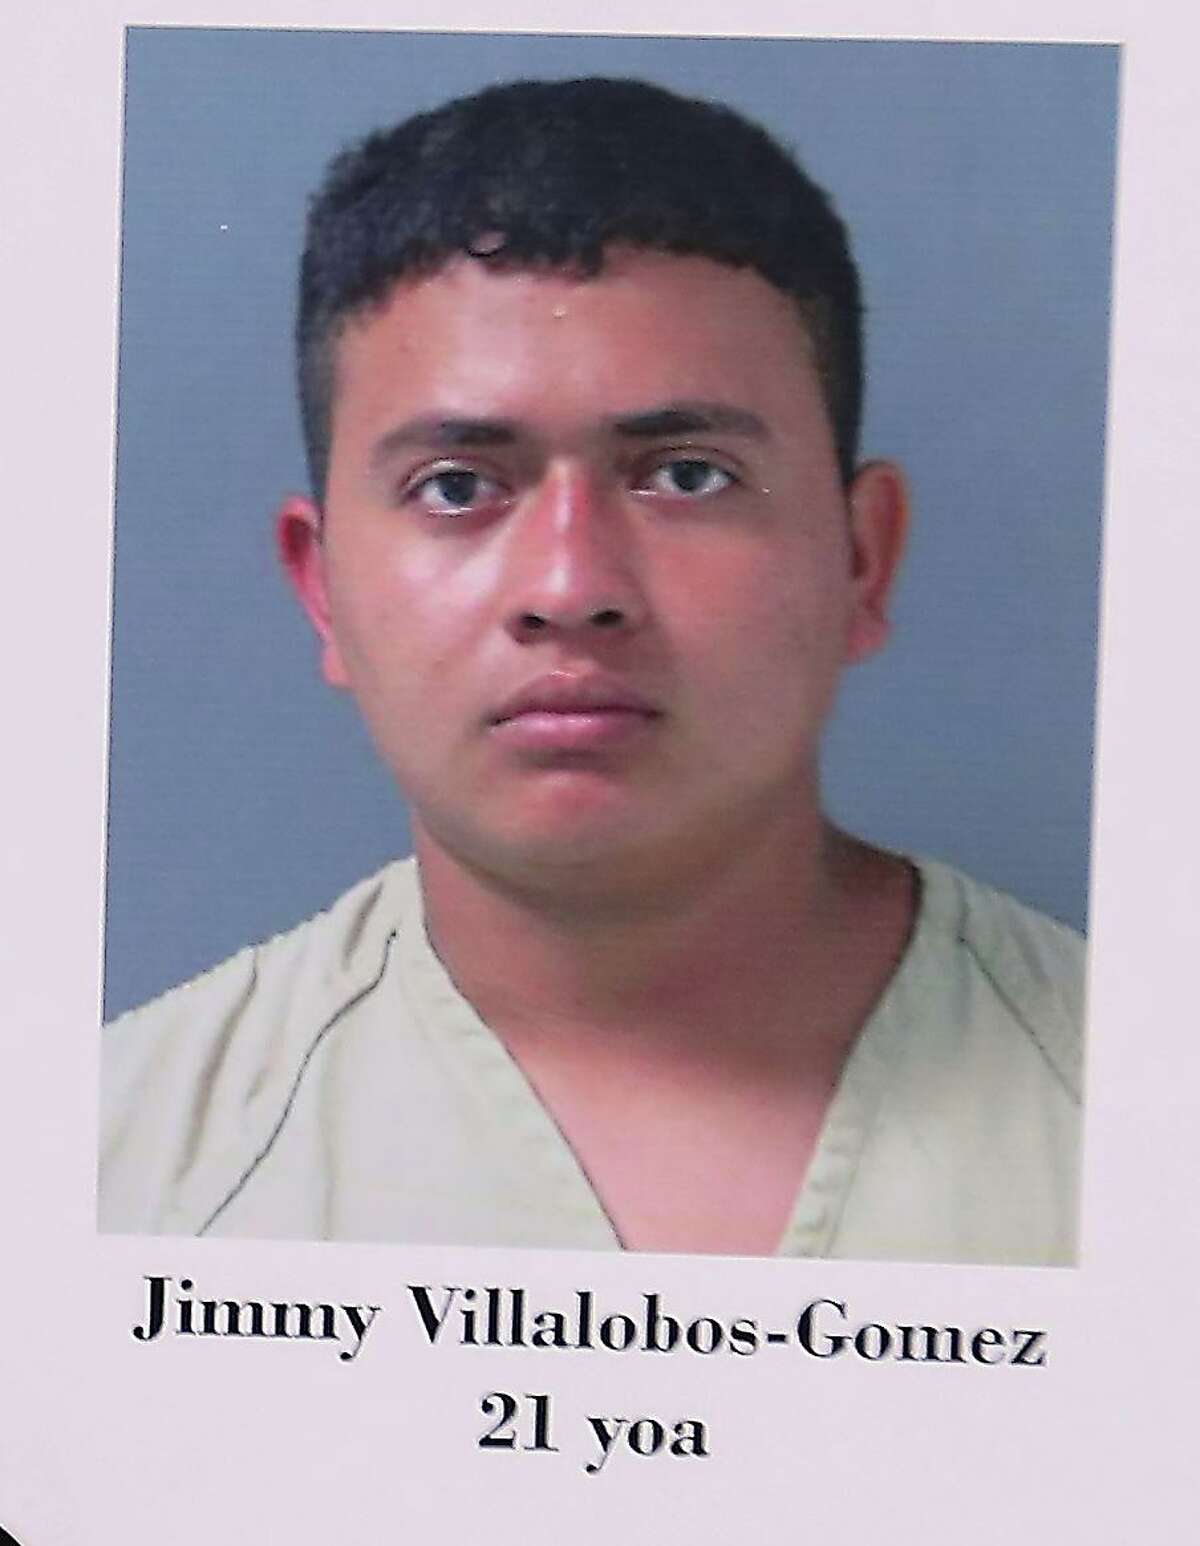 The arrest of MS-13 gang member Jimmy Villalobos-Gomez was announced Tuesday, Sept. 4, 2018, in Houston.